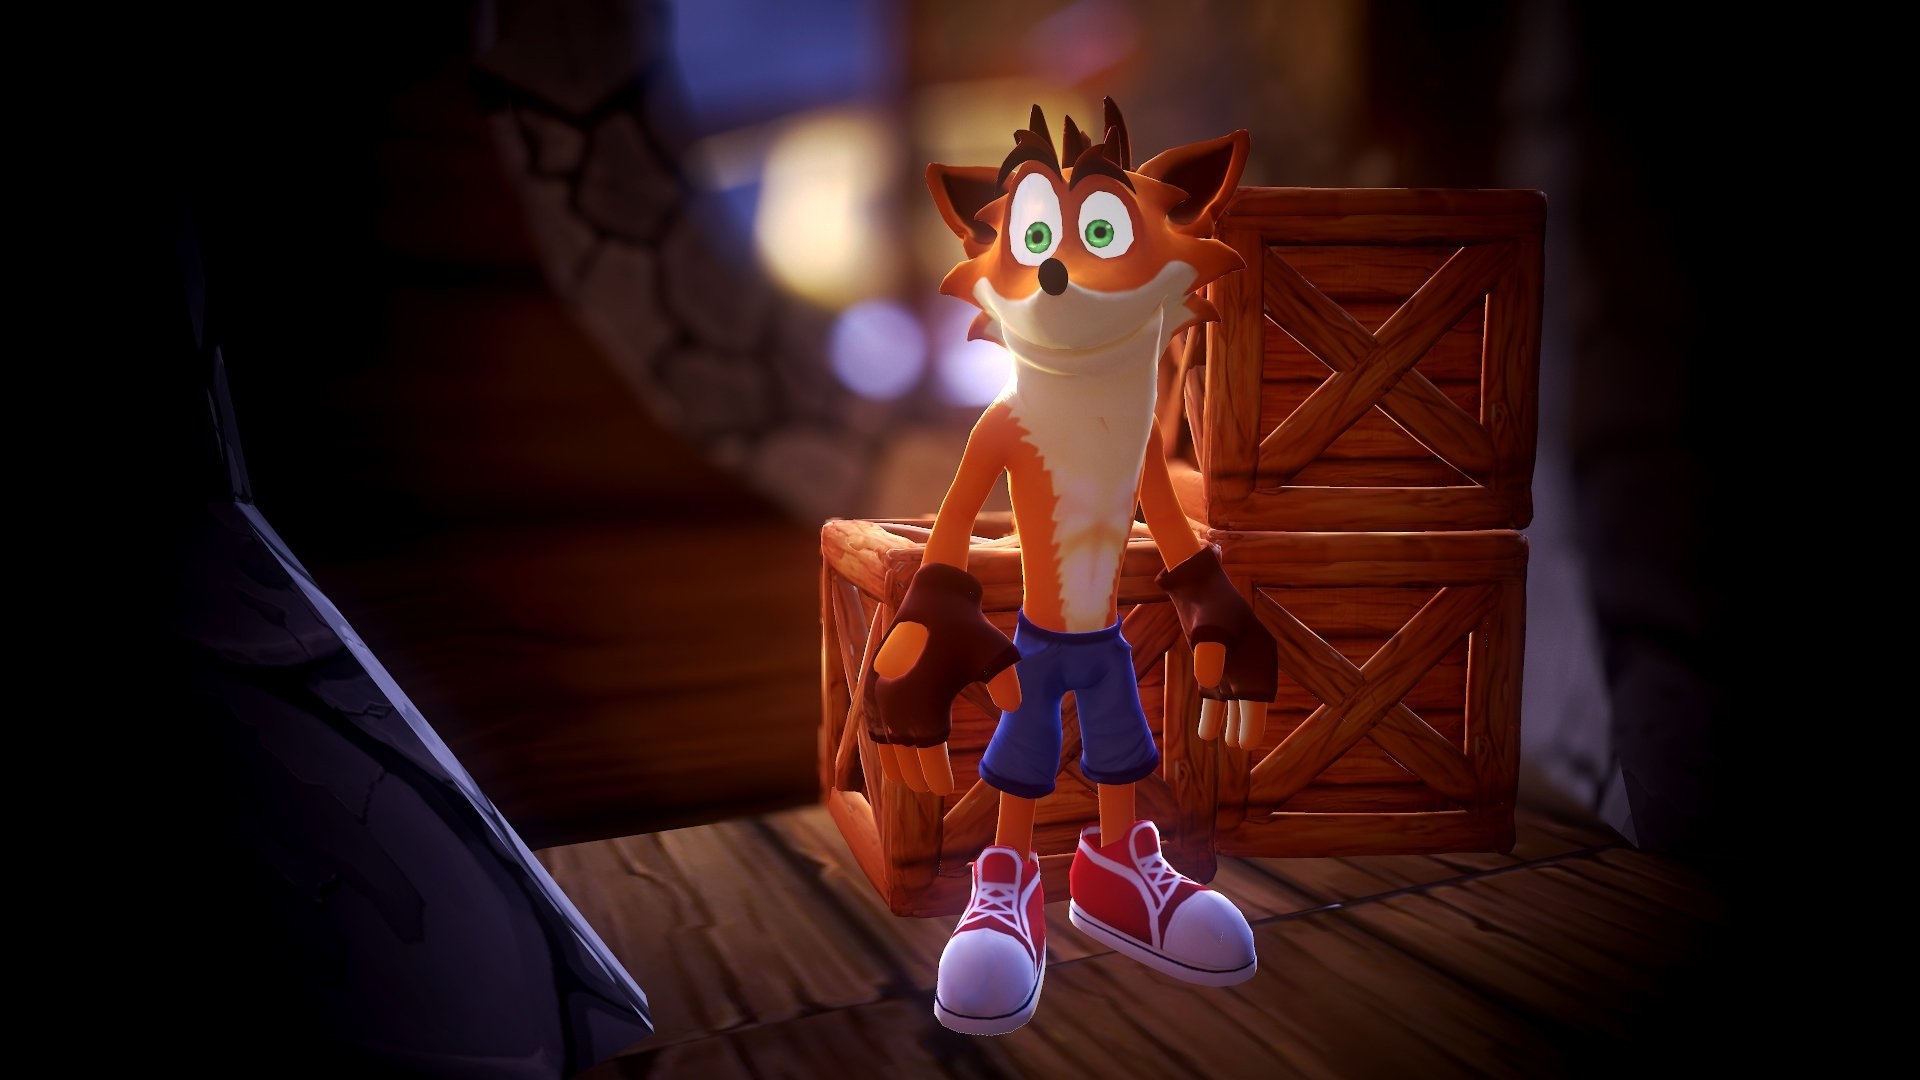 62 crash bandicoot hd wallpapers | background images - wallpaper abyss